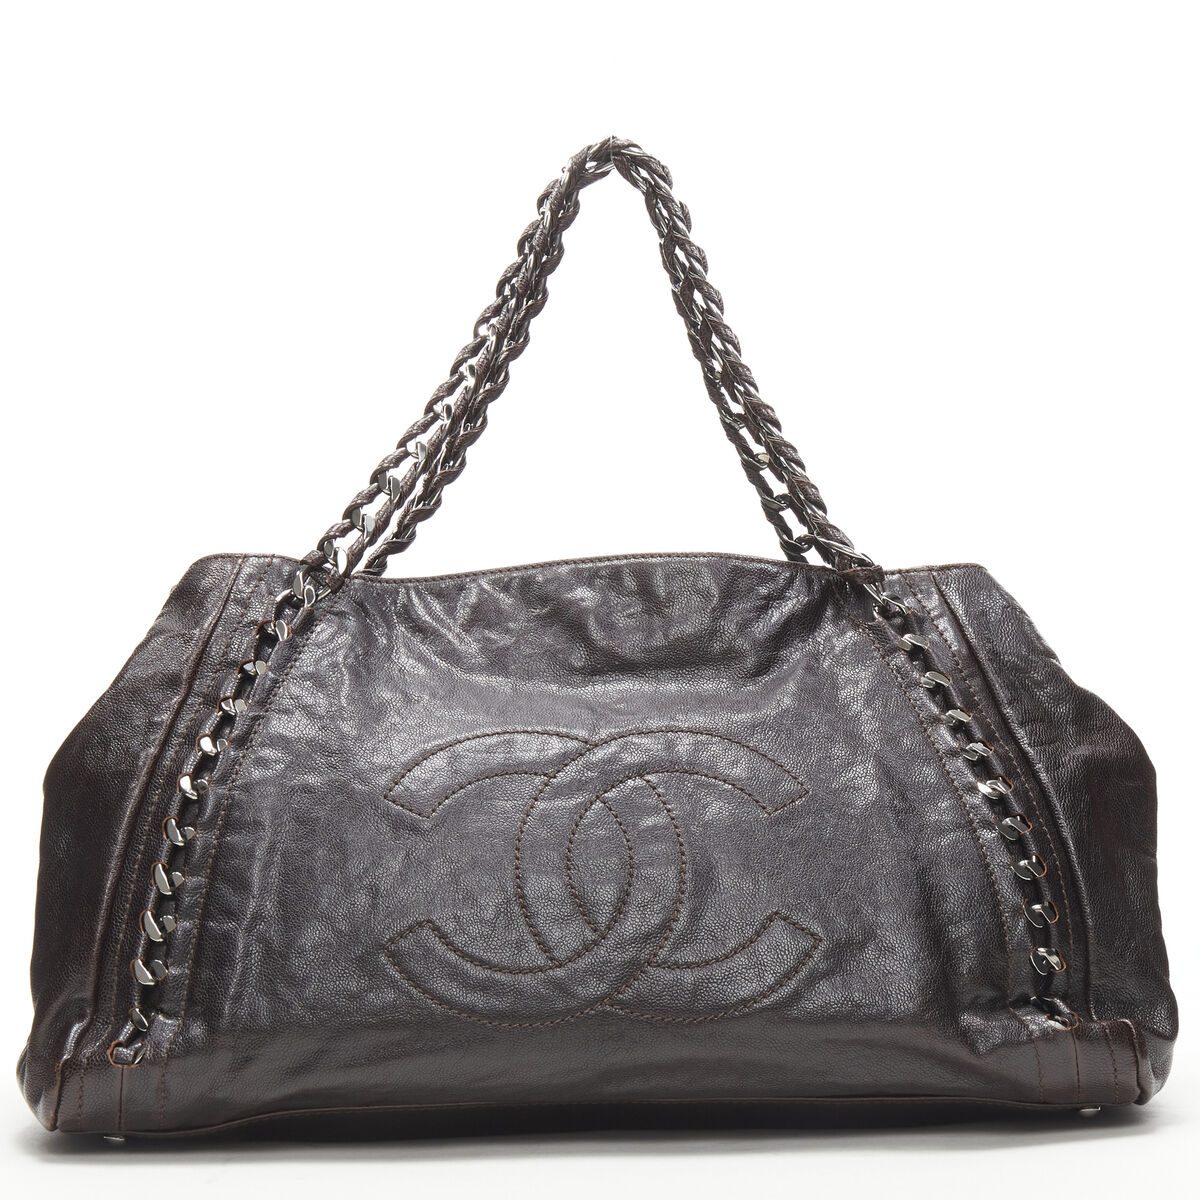 CHANEL East West dark brown grained leather CC logo chunky silver